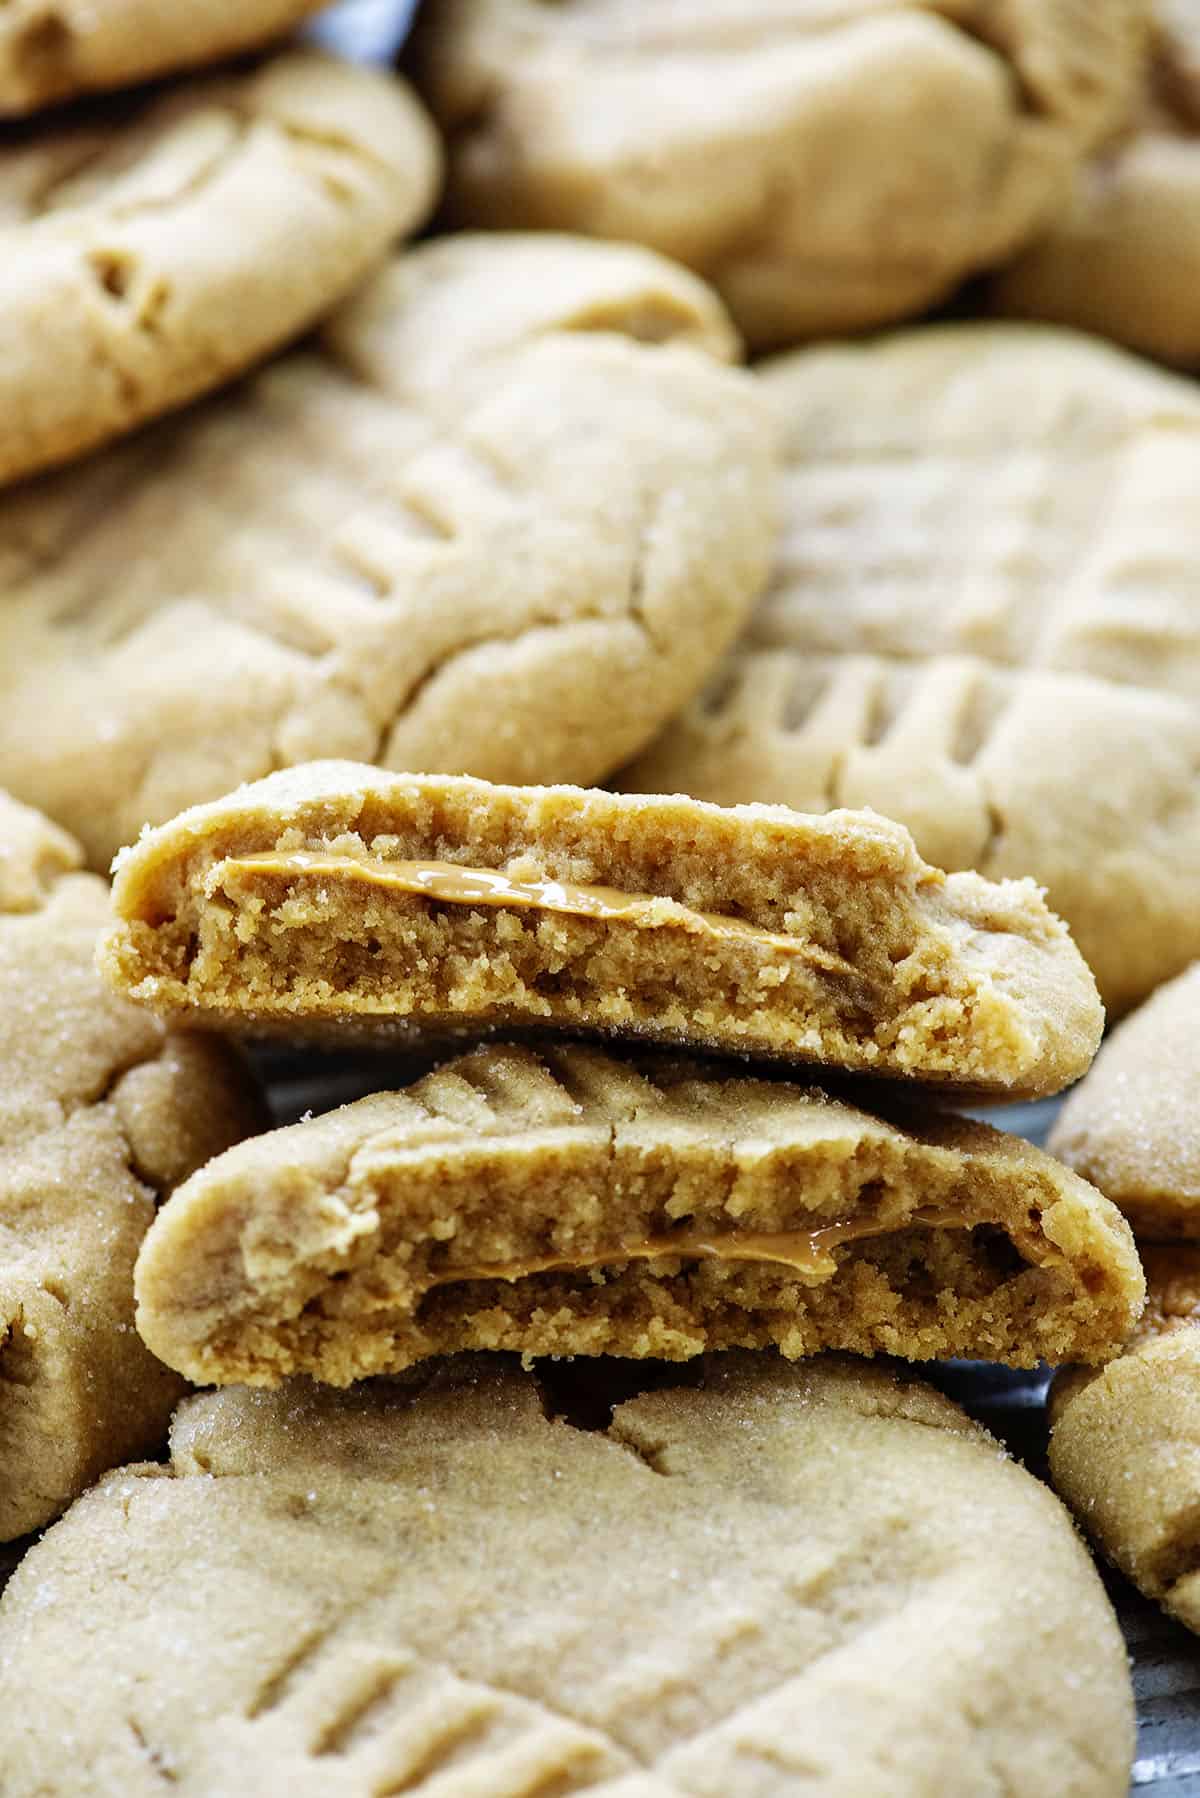 Peanut butter stuffed cookies piled together.